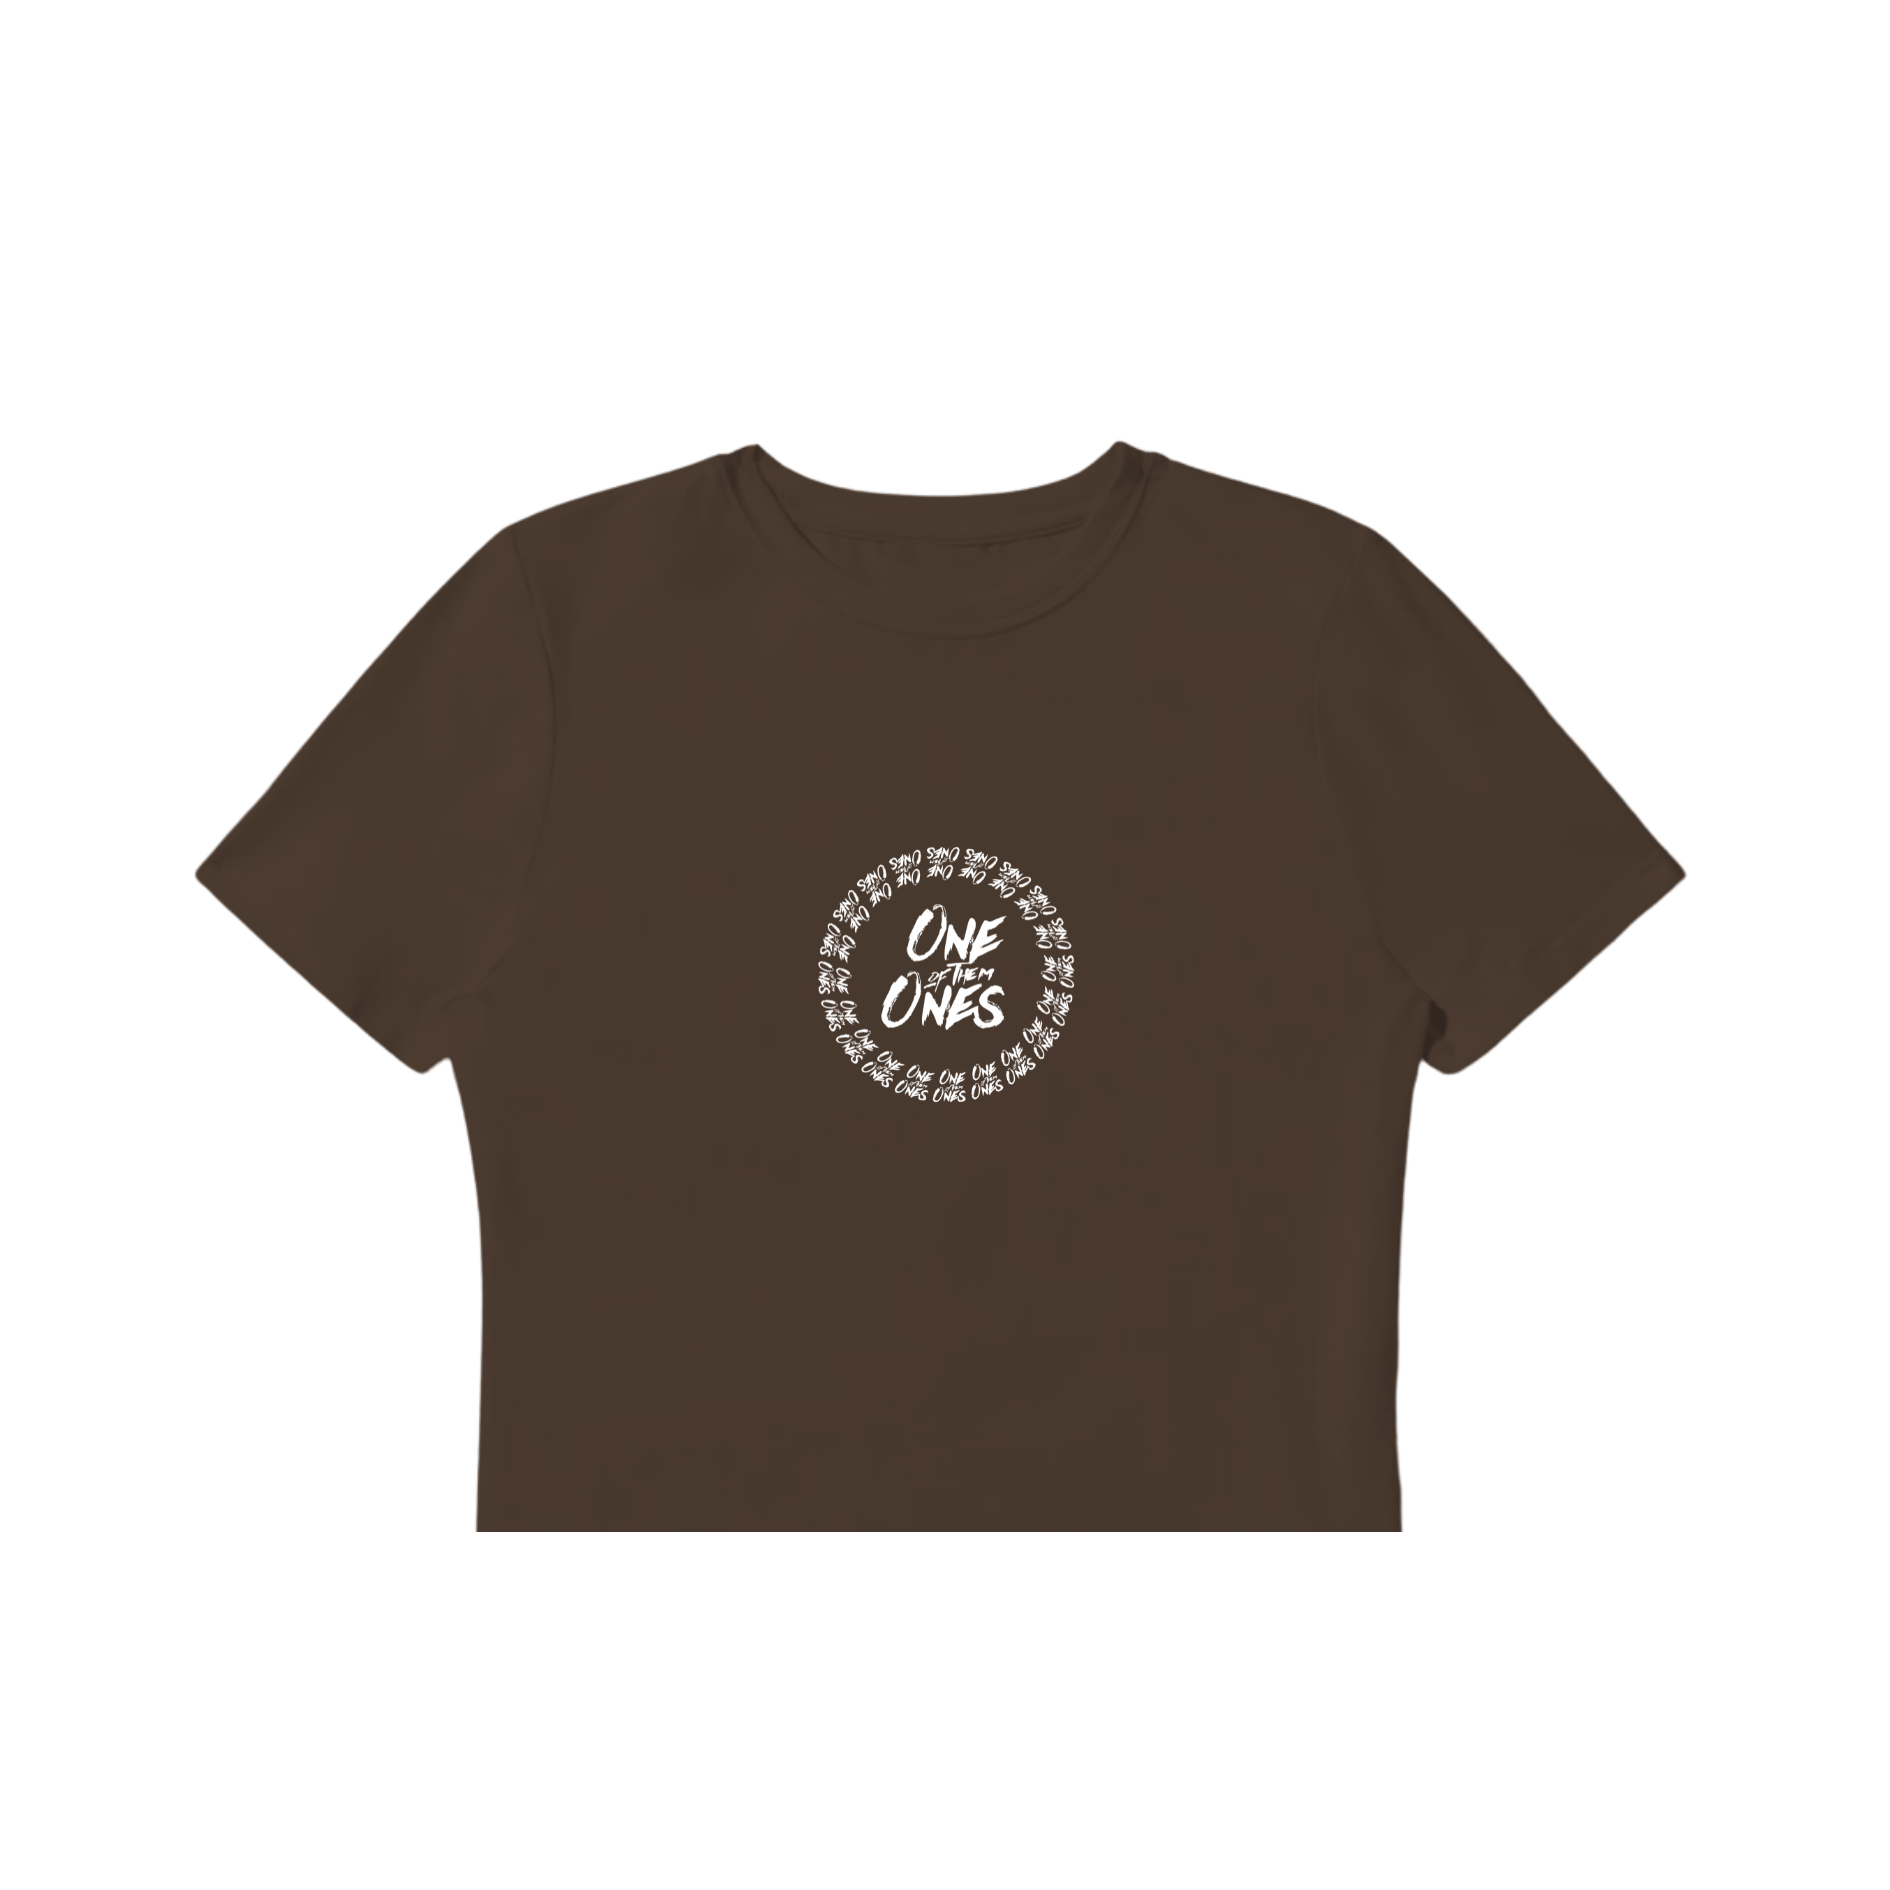 One Of Them Ones - Brown Baby Tee